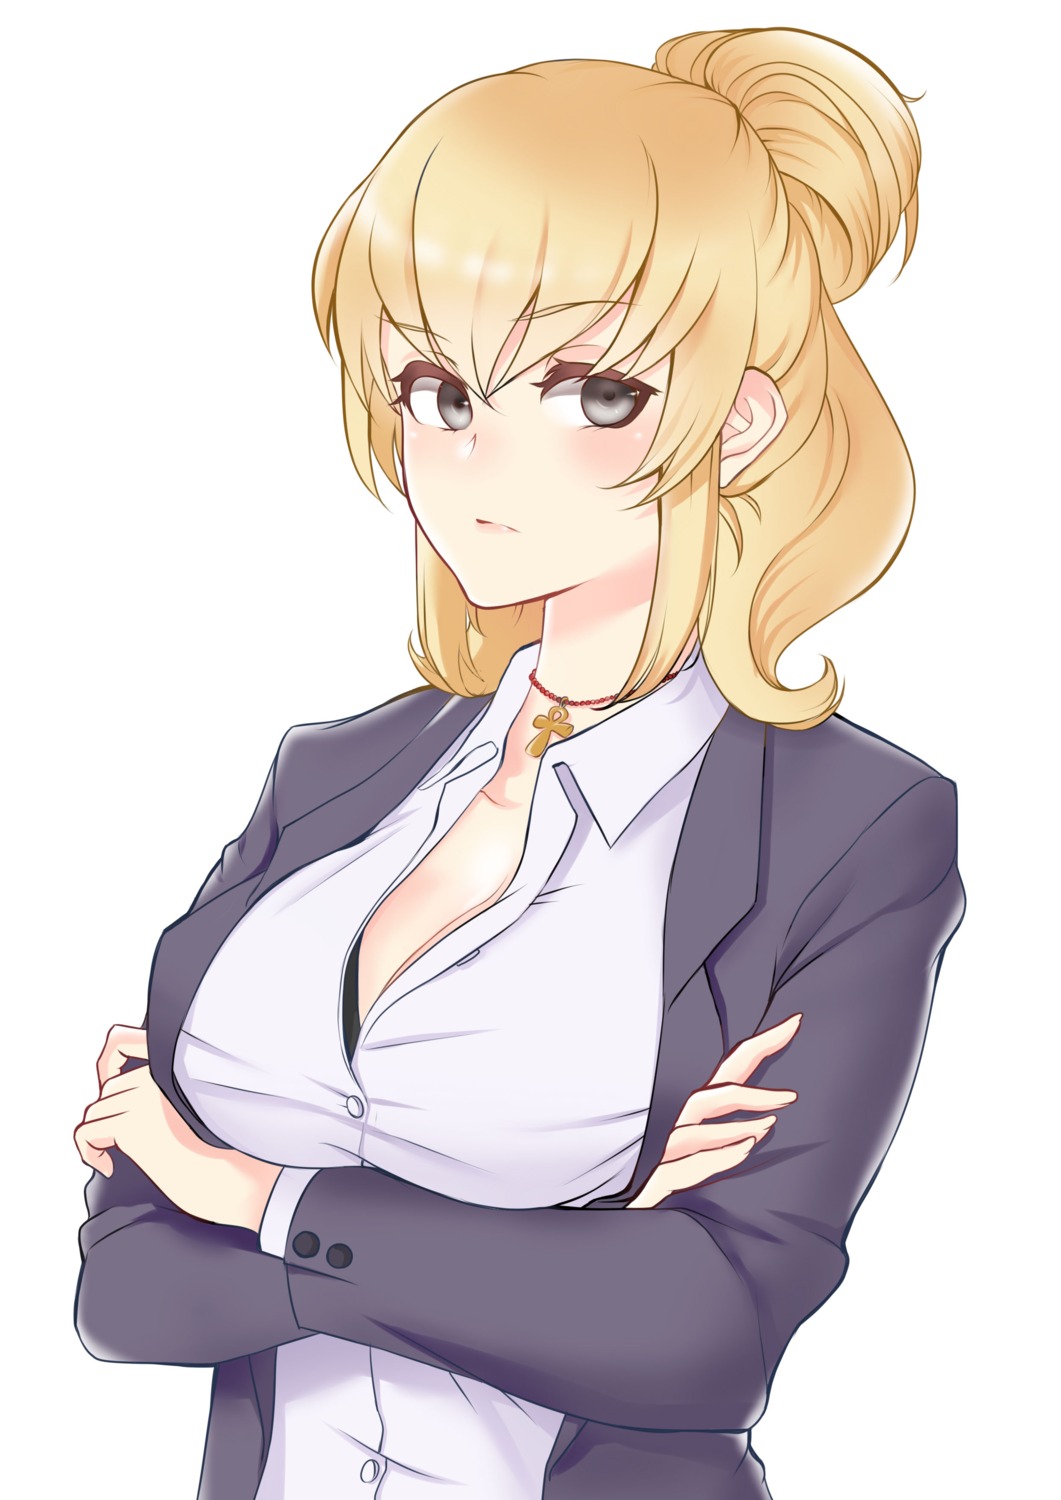 bra business_suit cleavage mariial open_shirt